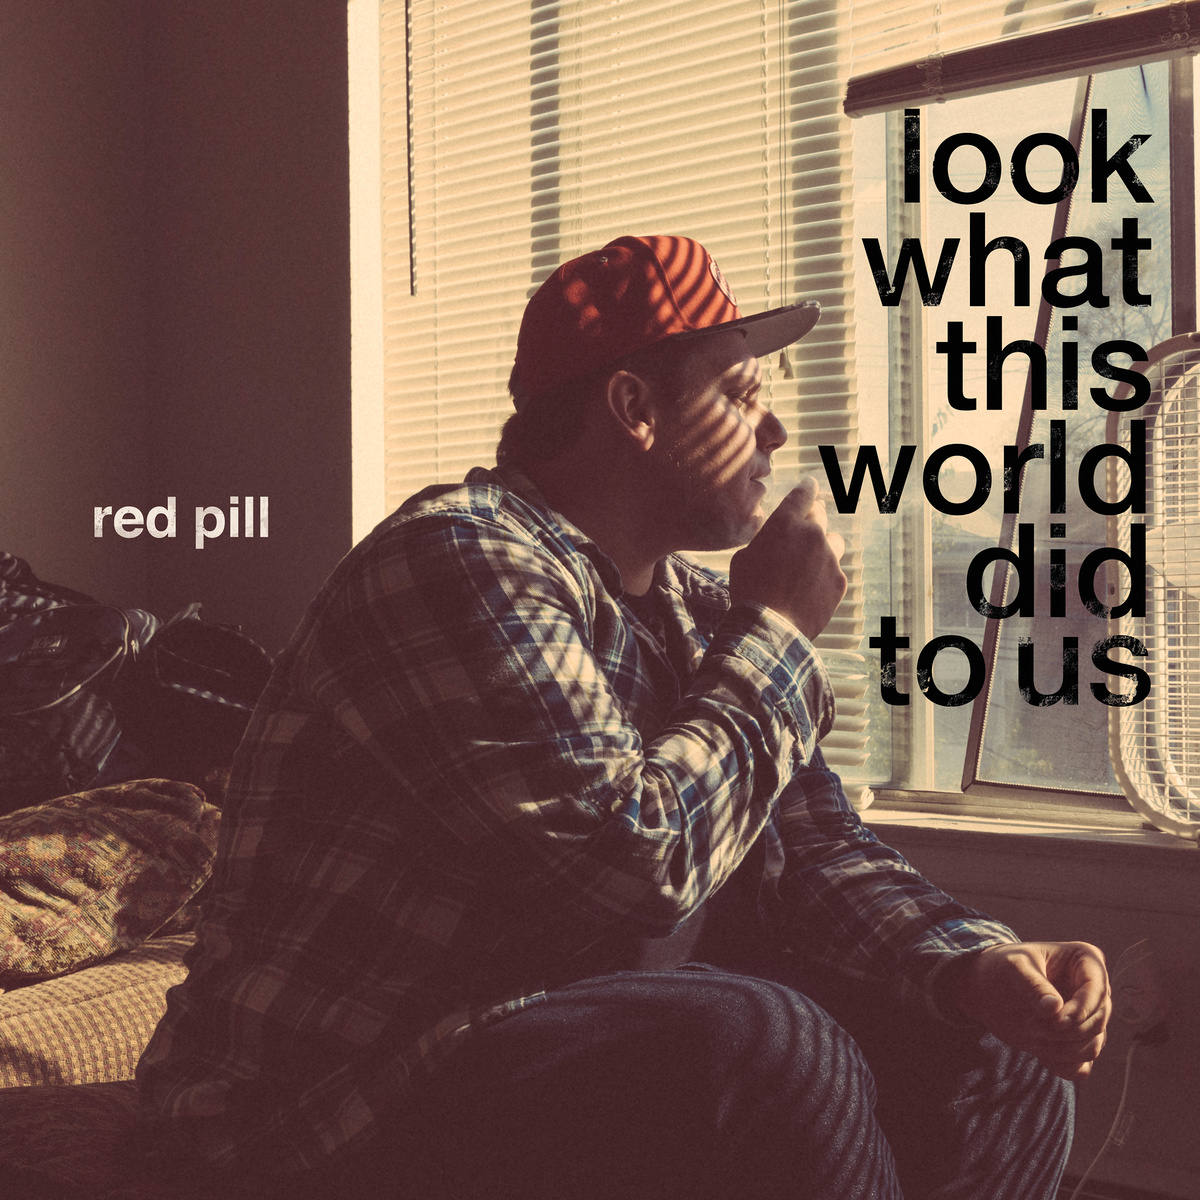 Red Pill - "Look What This World Did To Us" (Release) | @RedPillRap